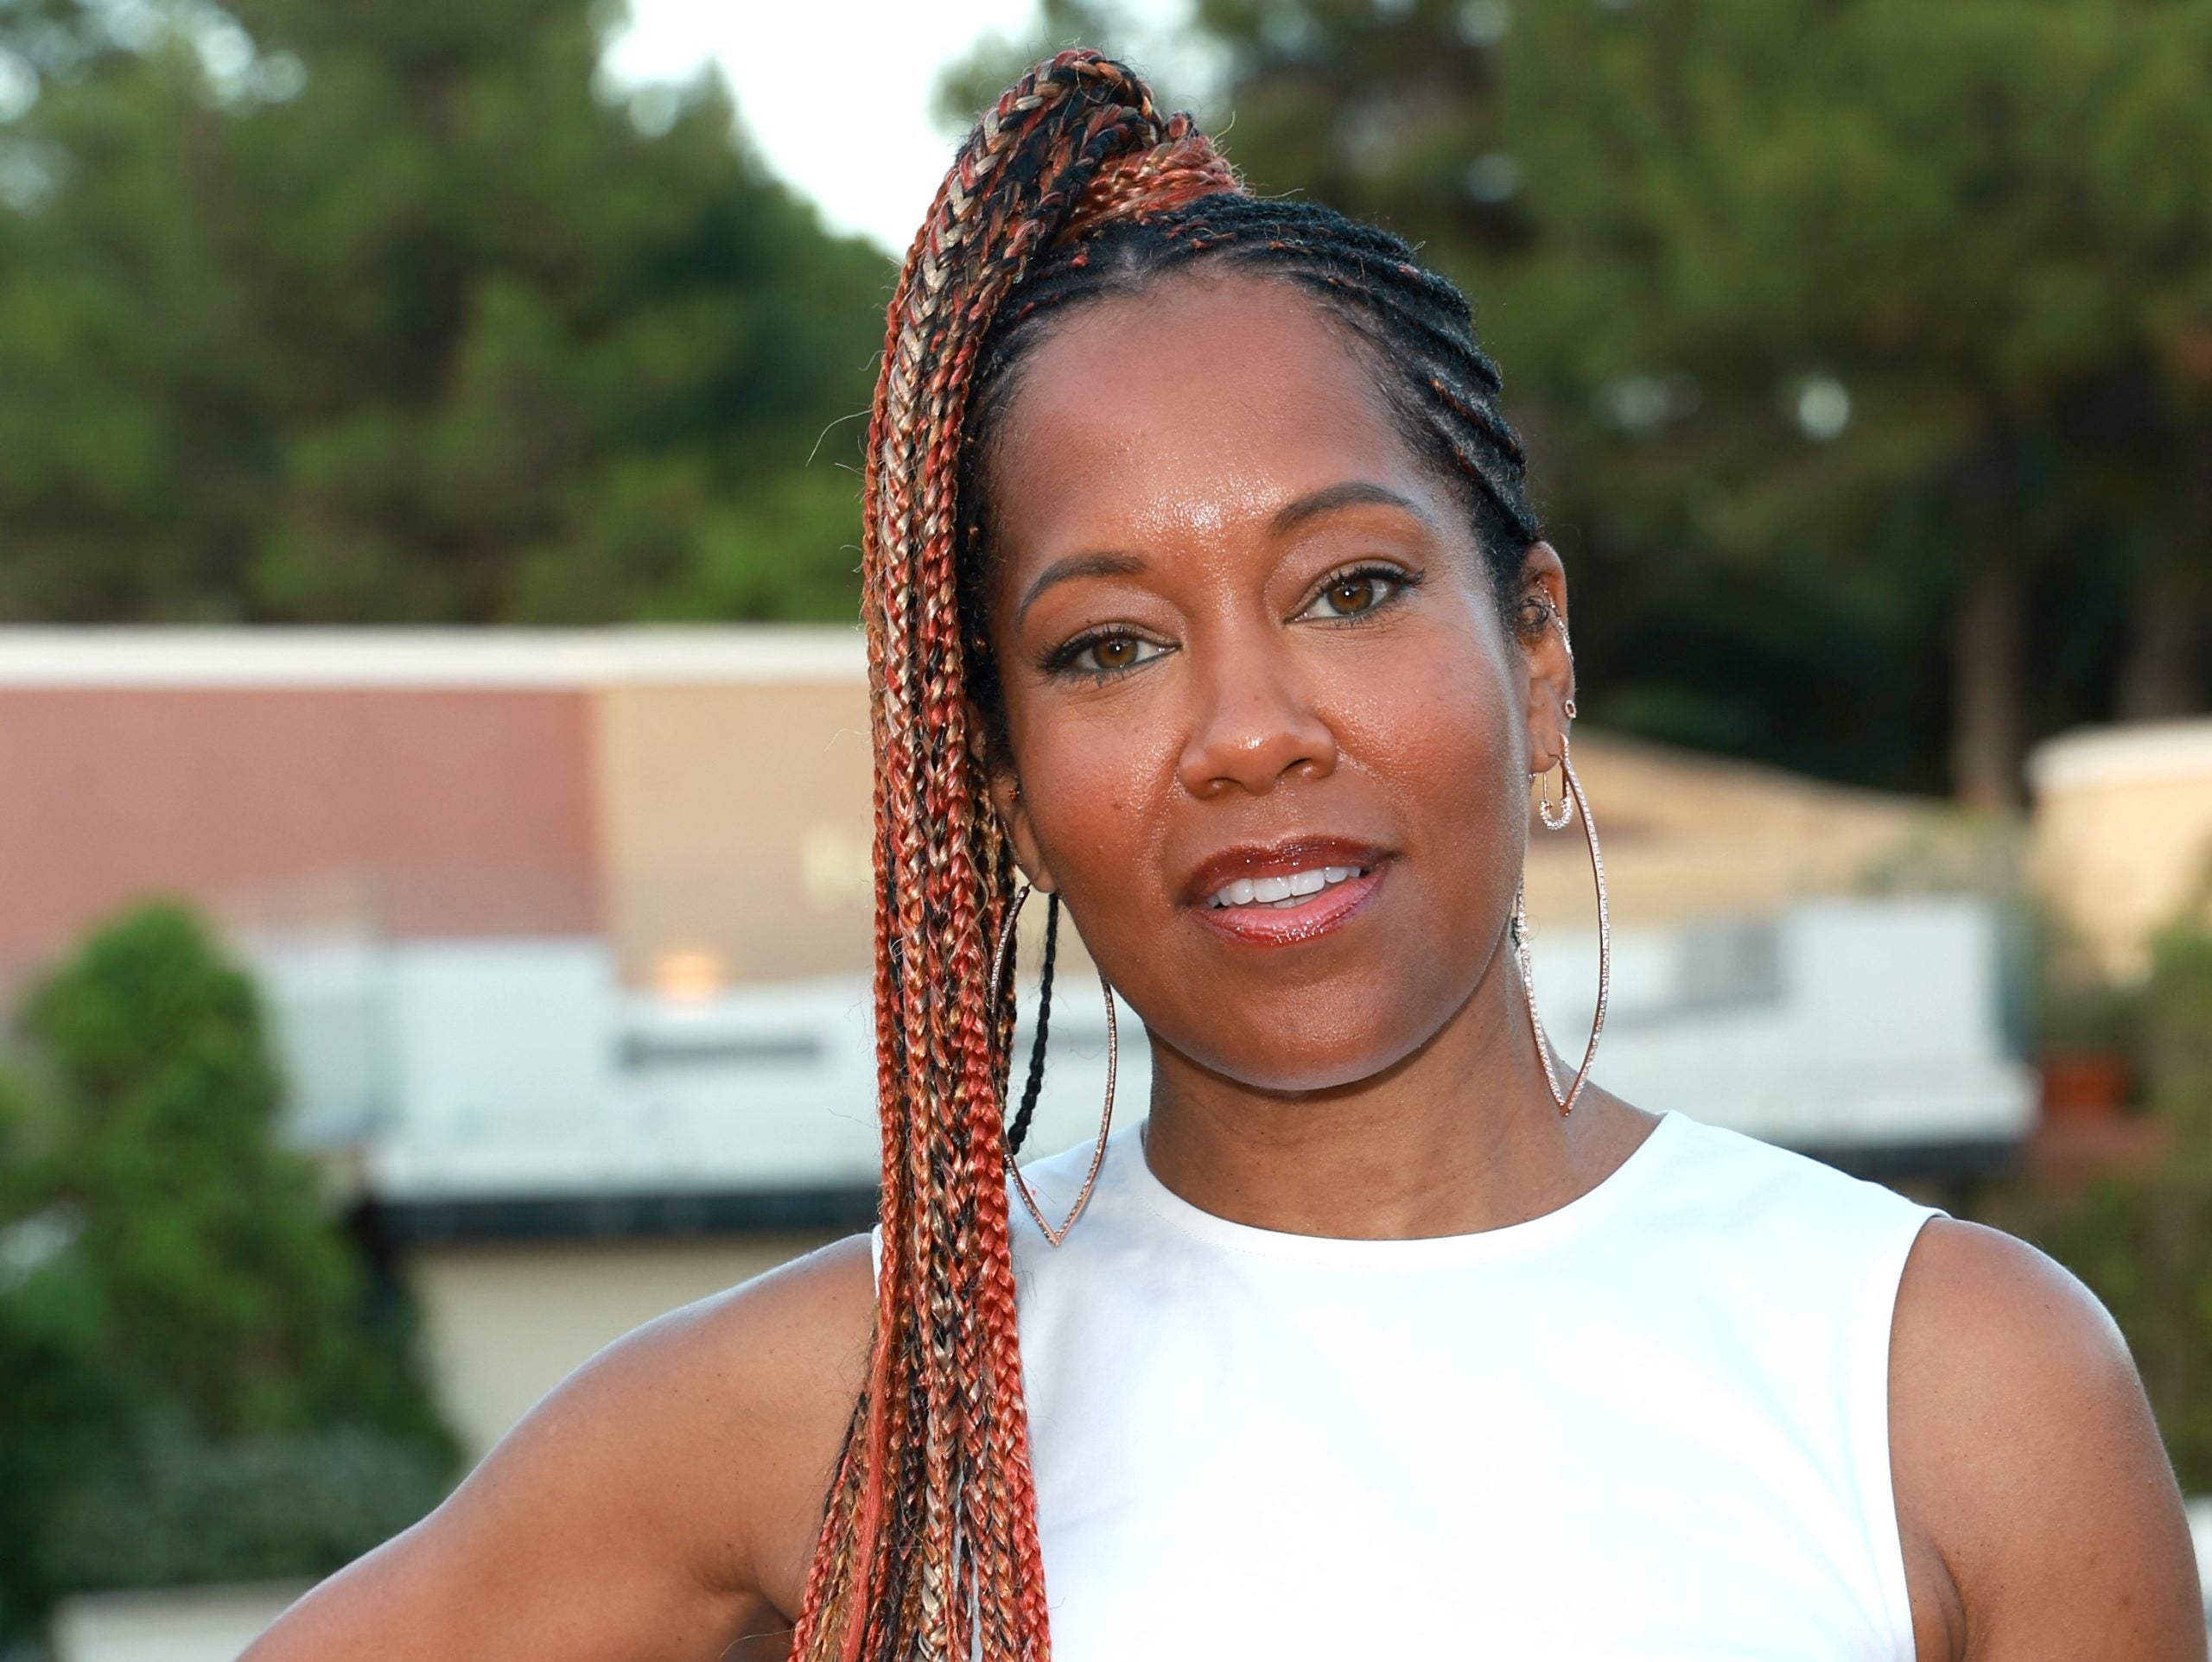 Regina King Makes Her First Public Appearance Since Her Son's Passing